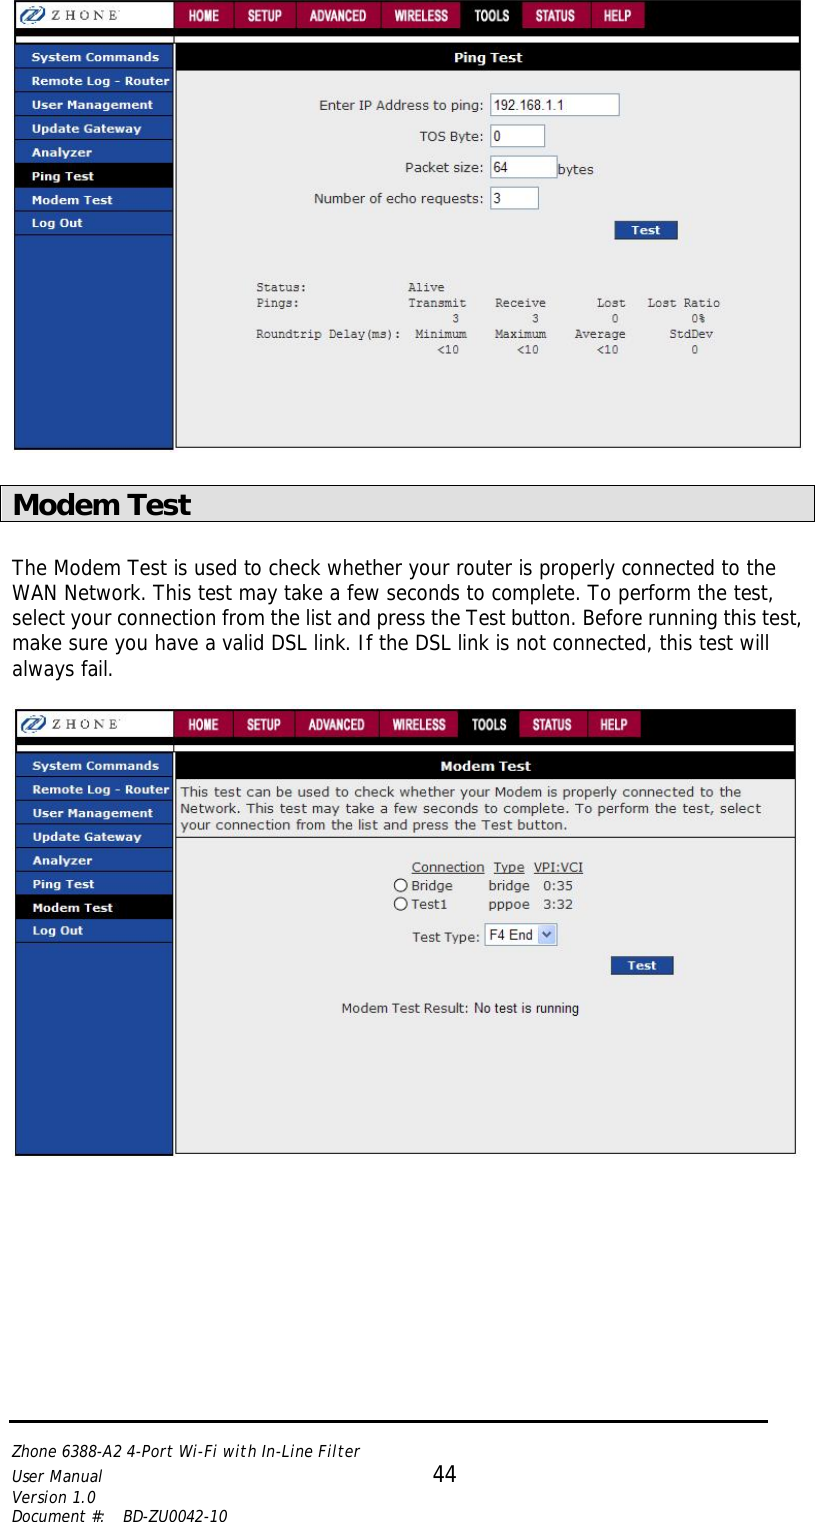   Zhone 6388-A2 4-Port Wi-Fi with In-Line Filter User Manual 44 Version 1.0 Document #:  BD-ZU0042-10     Modem Test  The Modem Test is used to check whether your router is properly connected to the WAN Network. This test may take a few seconds to complete. To perform the test, select your connection from the list and press the Test button. Before running this test, make sure you have a valid DSL link. If the DSL link is not connected, this test will always fail.    